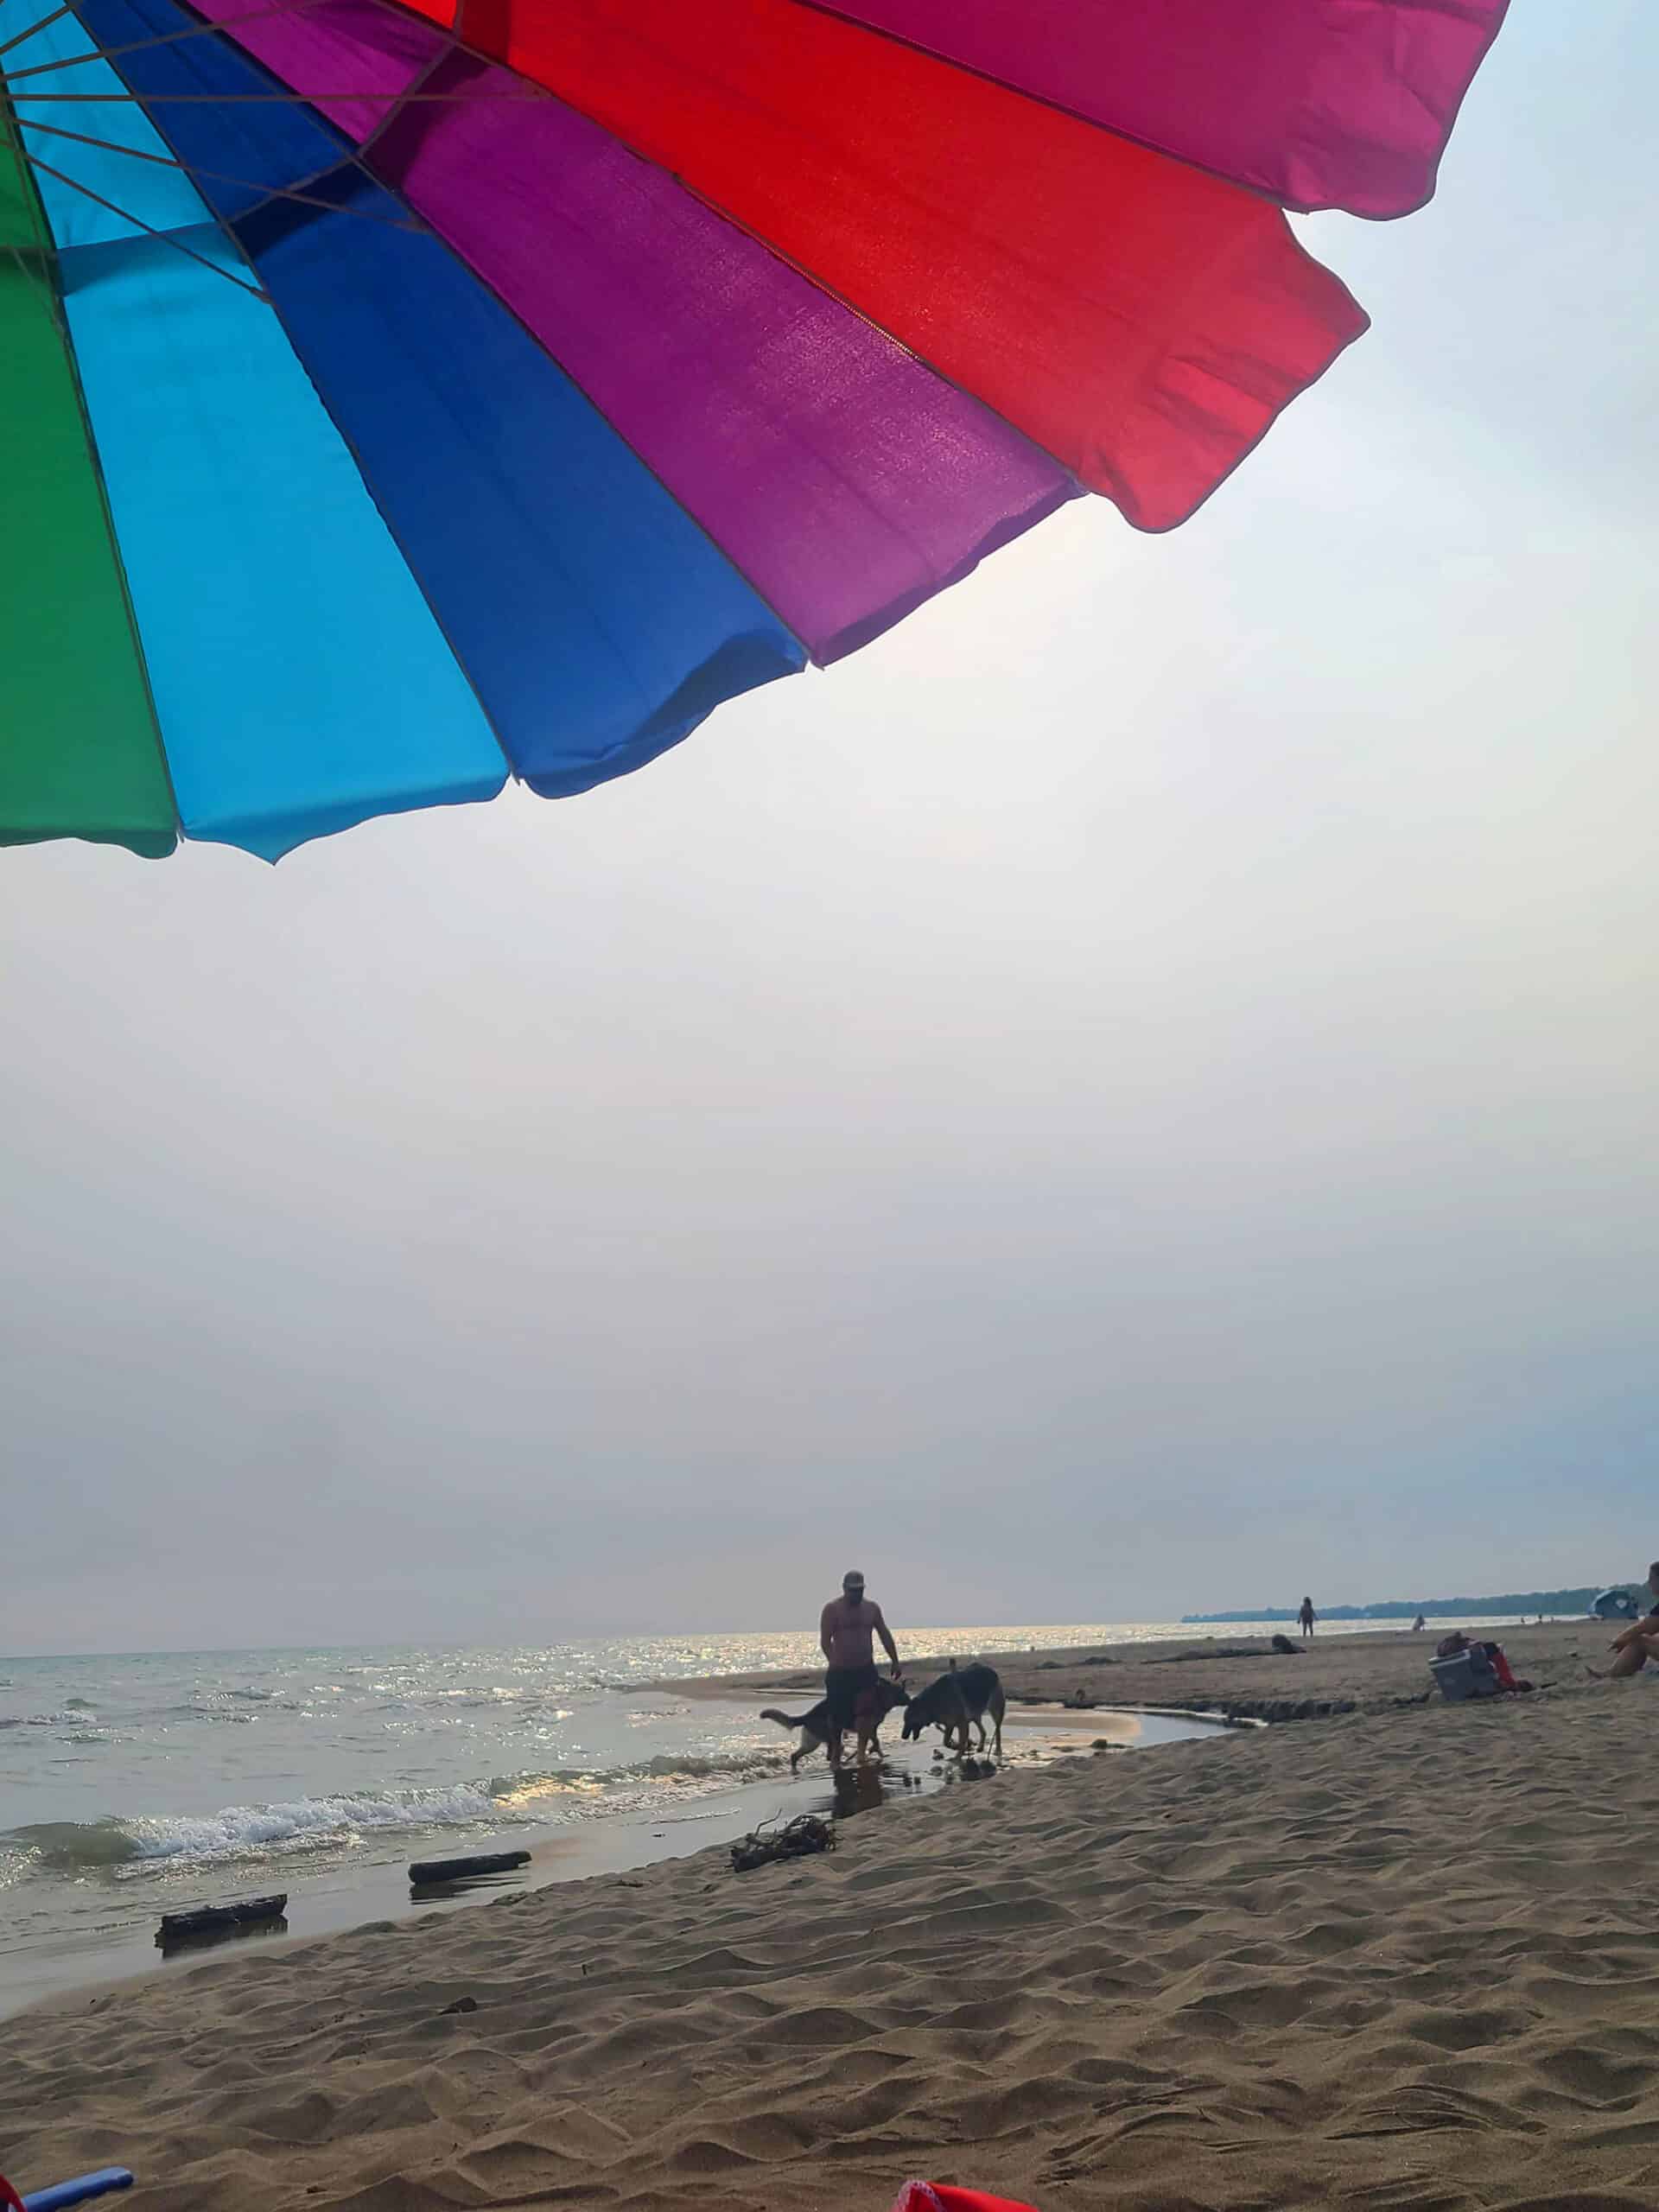 Silhouette of a person with their dog on a beach, with a rainbow beach umbrella in the foreground.